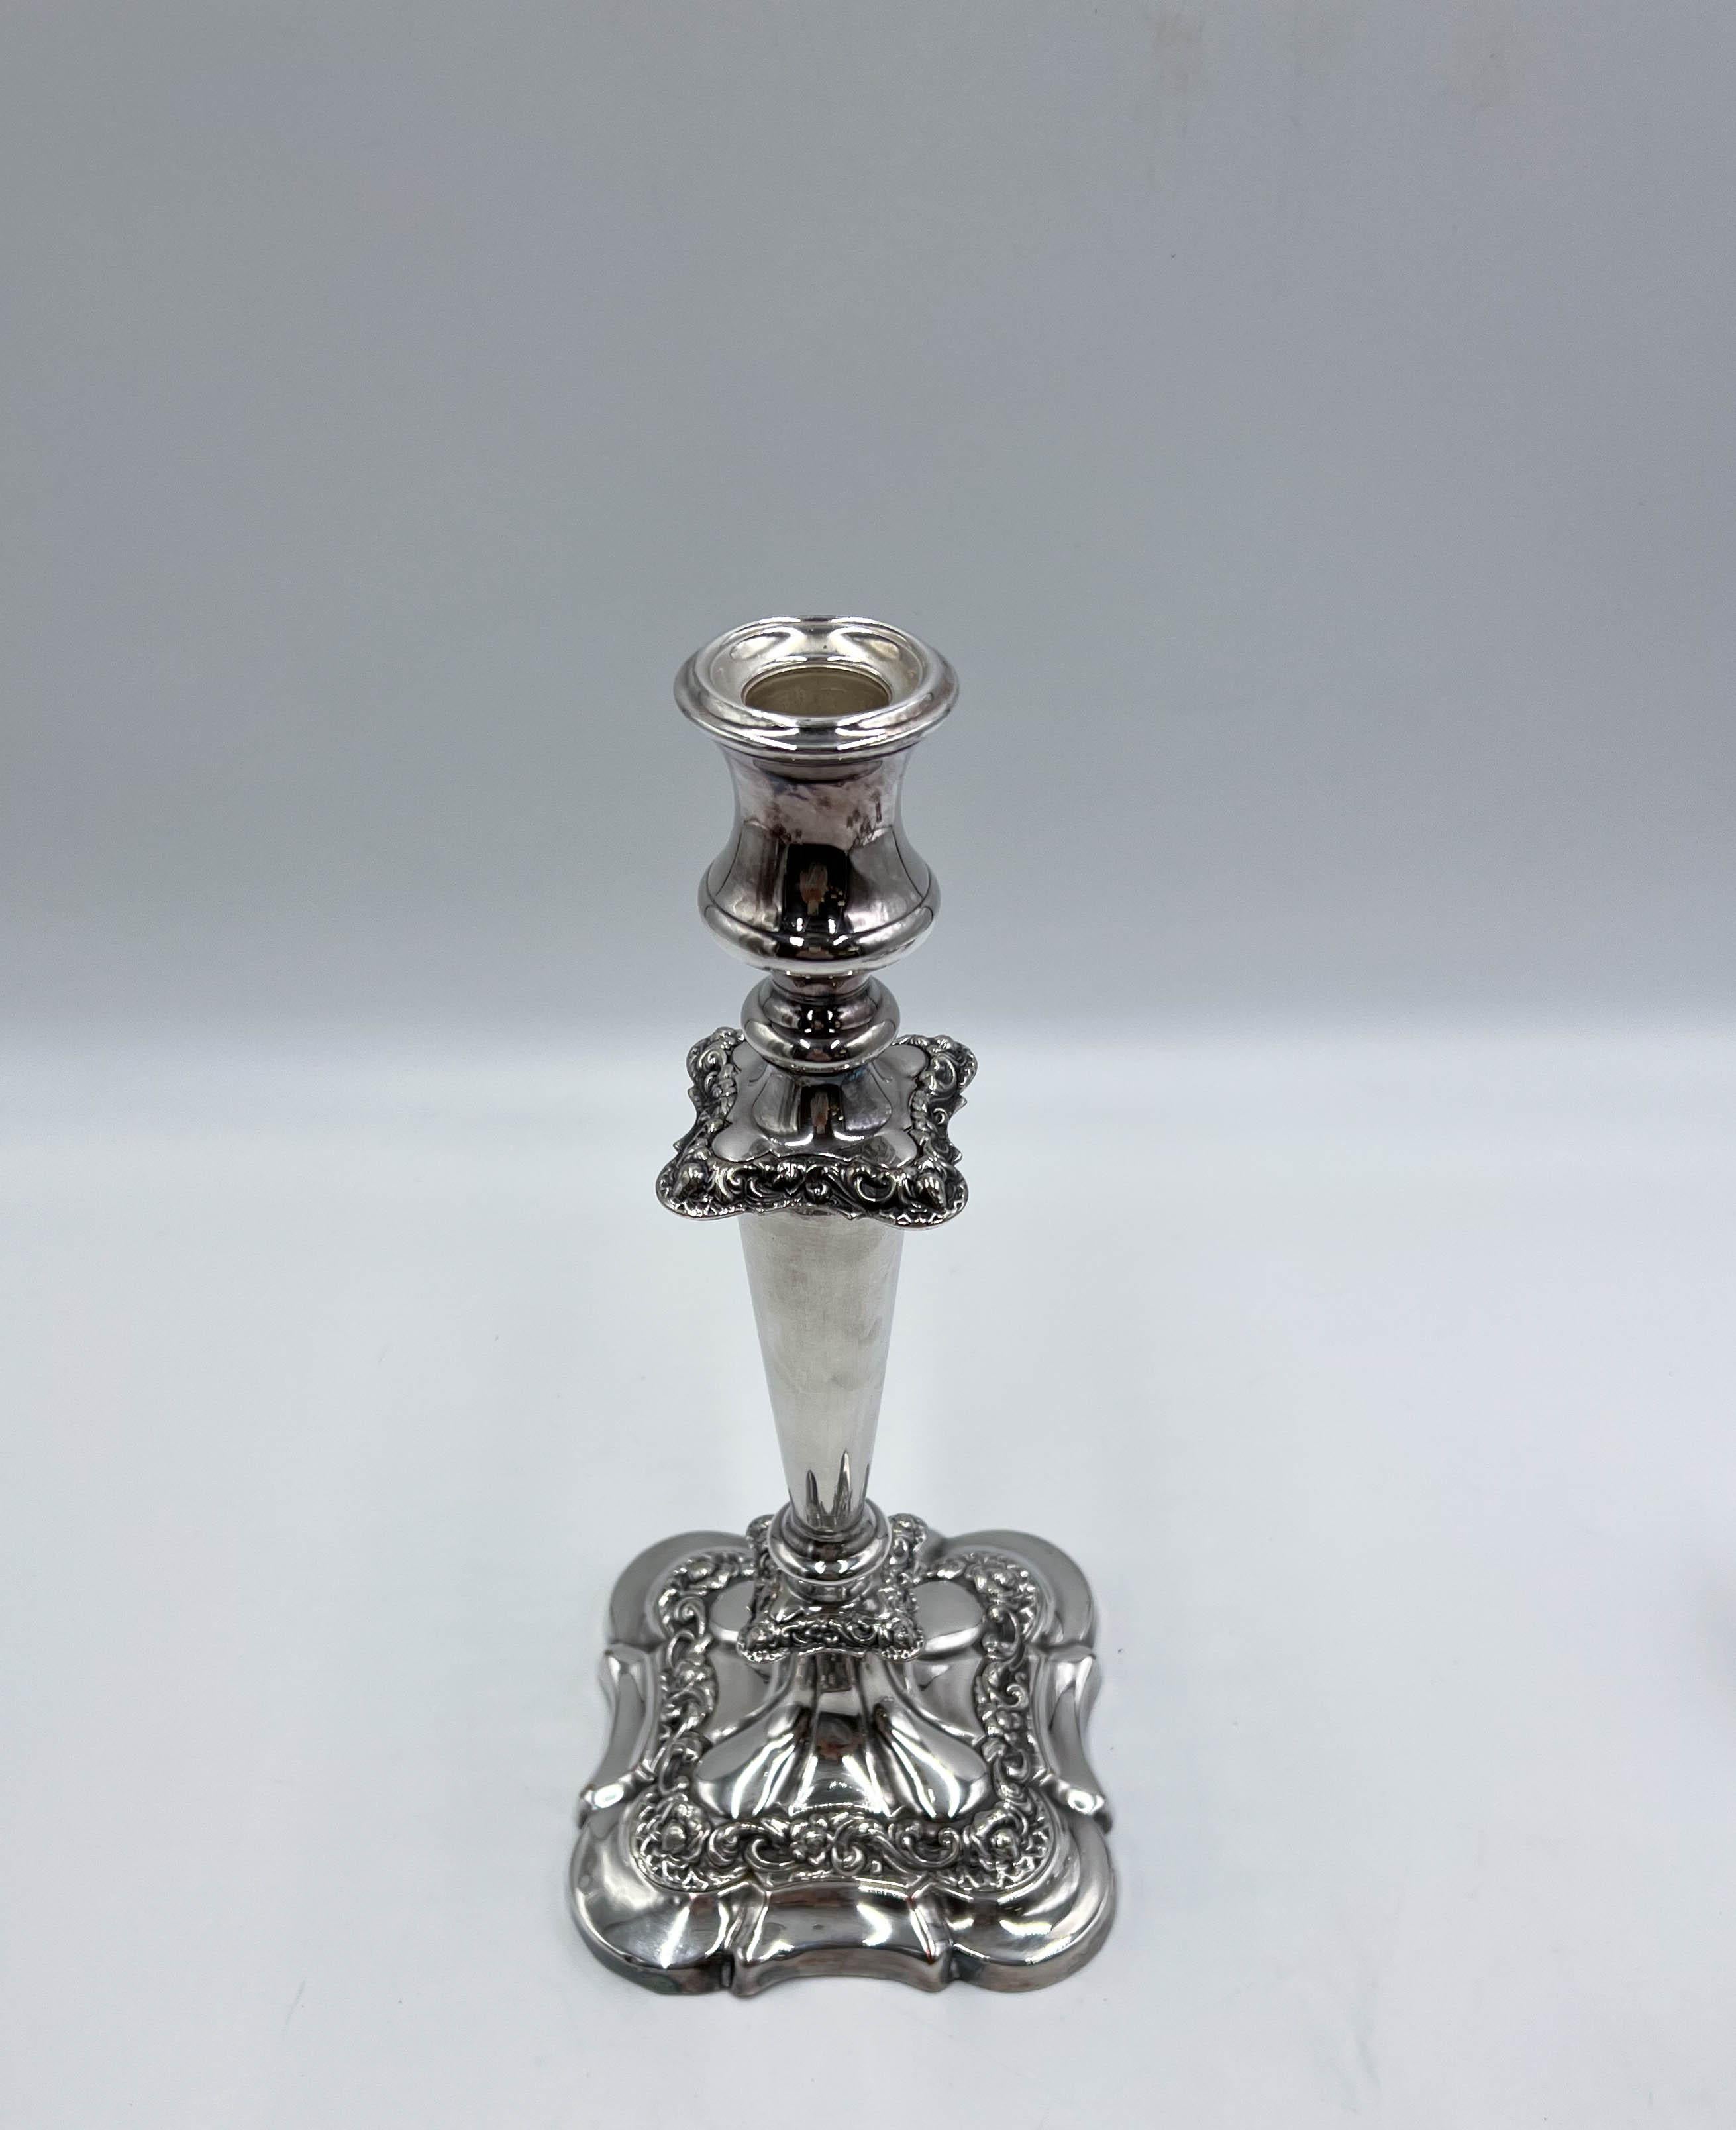 Pair of 1920s William Suckling Ltd English Silver Plate Candelabras/Candlesticks For Sale 10